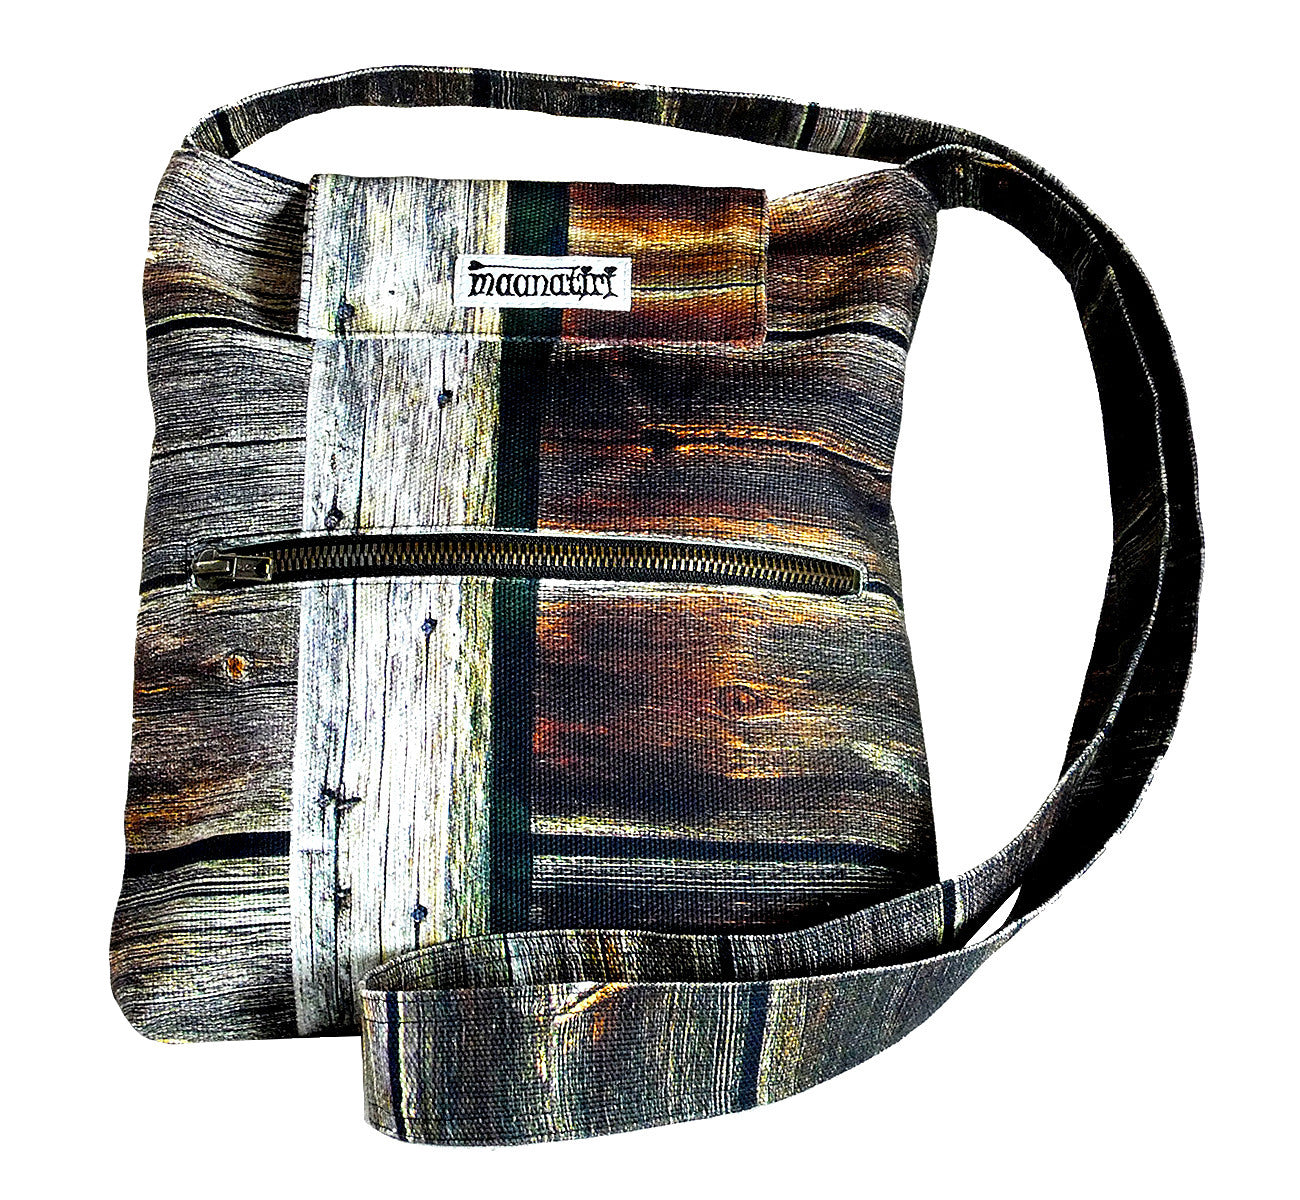 Image nature textile wood wall, handmade satchel with long shoulder strap, 25x28x6 cm.